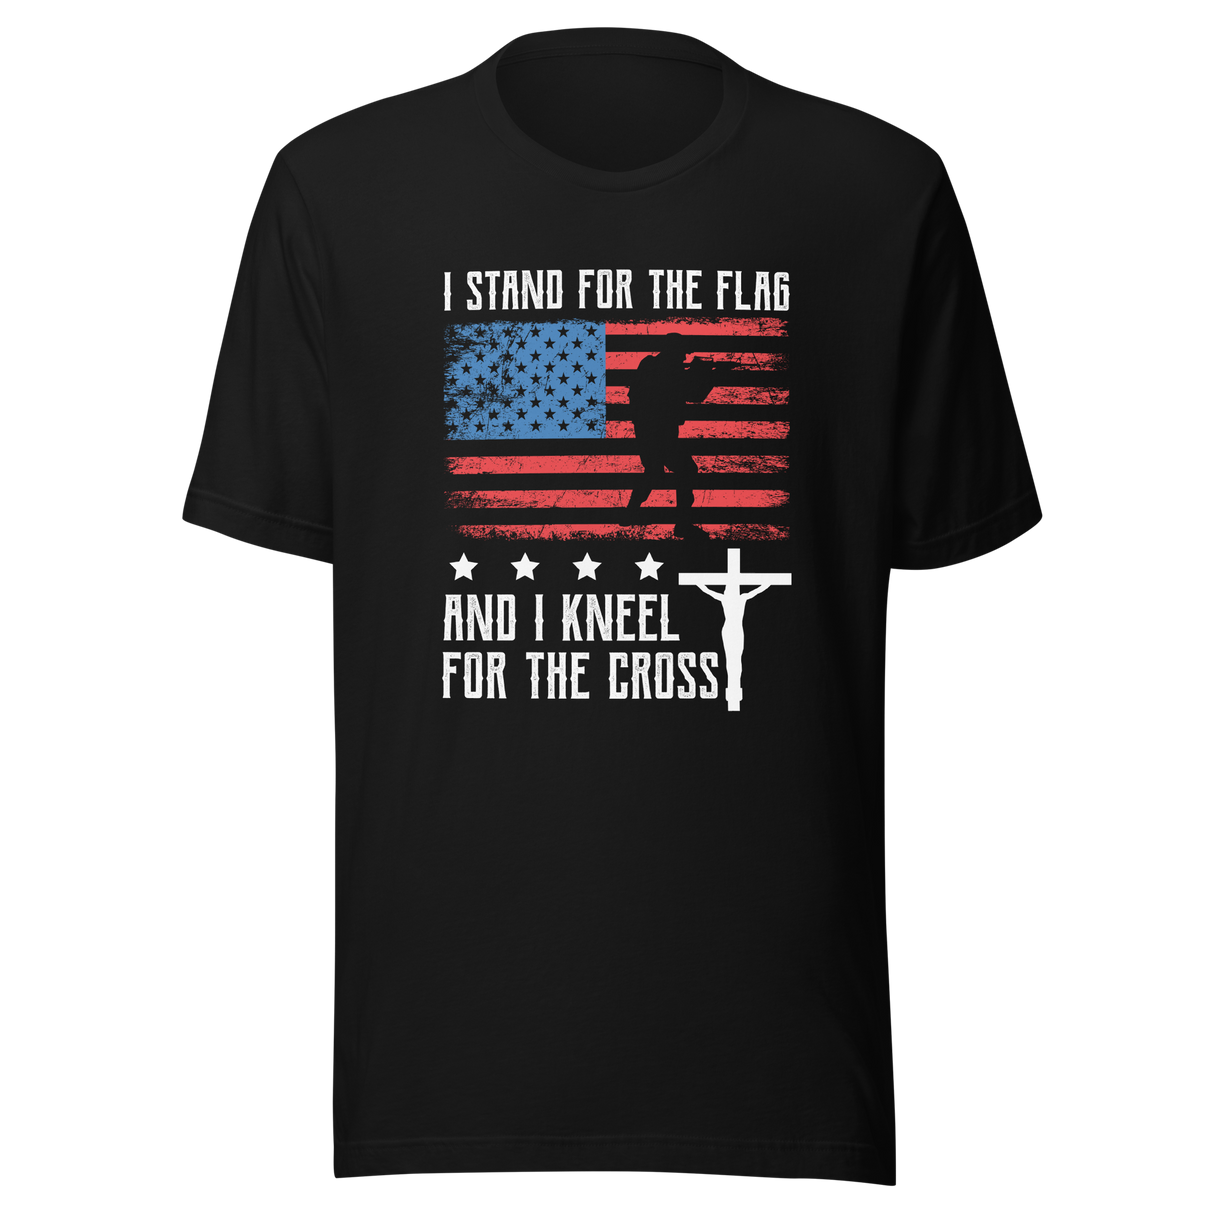 i-stand-for-the-flag-and-kneel-for-the-cross-stand-tee-kneel-flag-t-shirt-usa-tee-t-shirt-tee#color_black